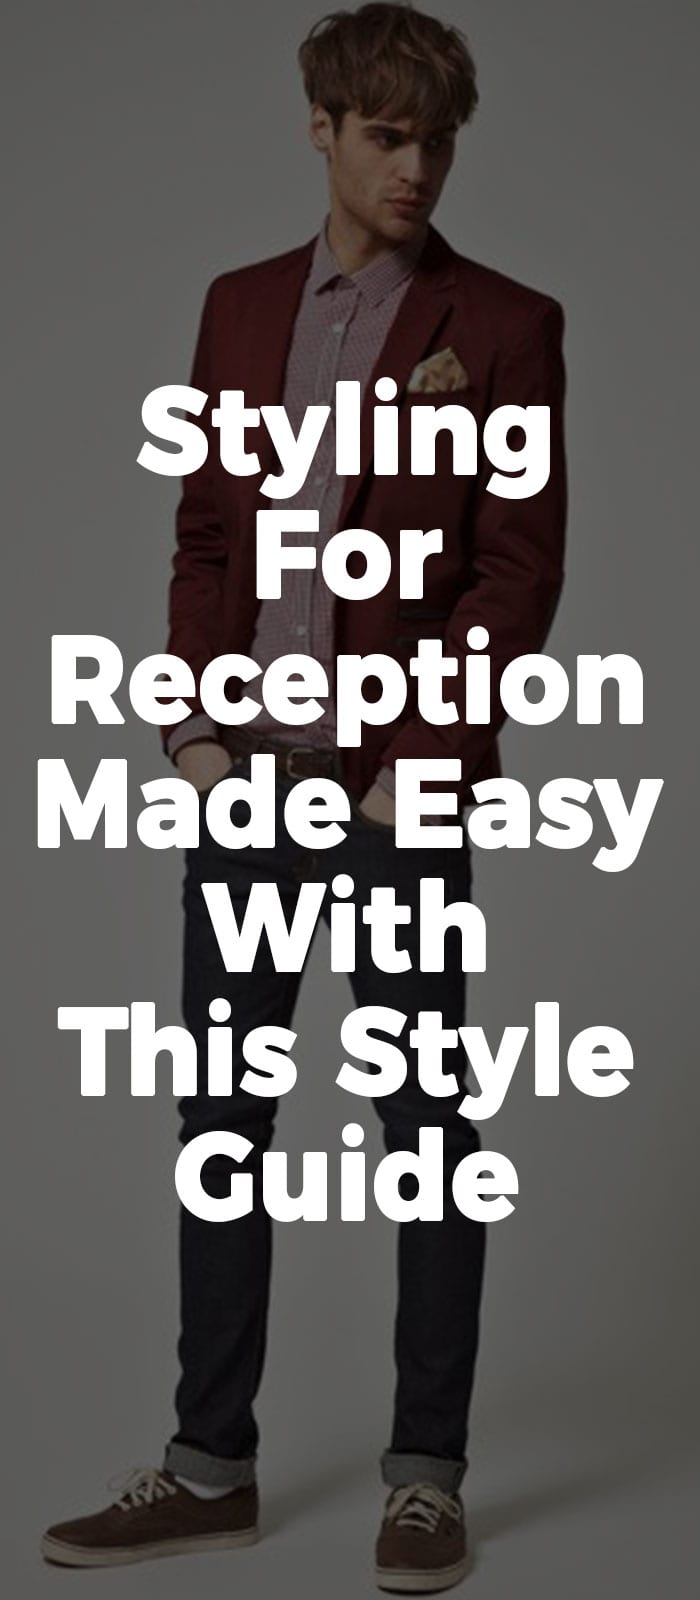 Styling For Reception Made Easy With This Style Guide